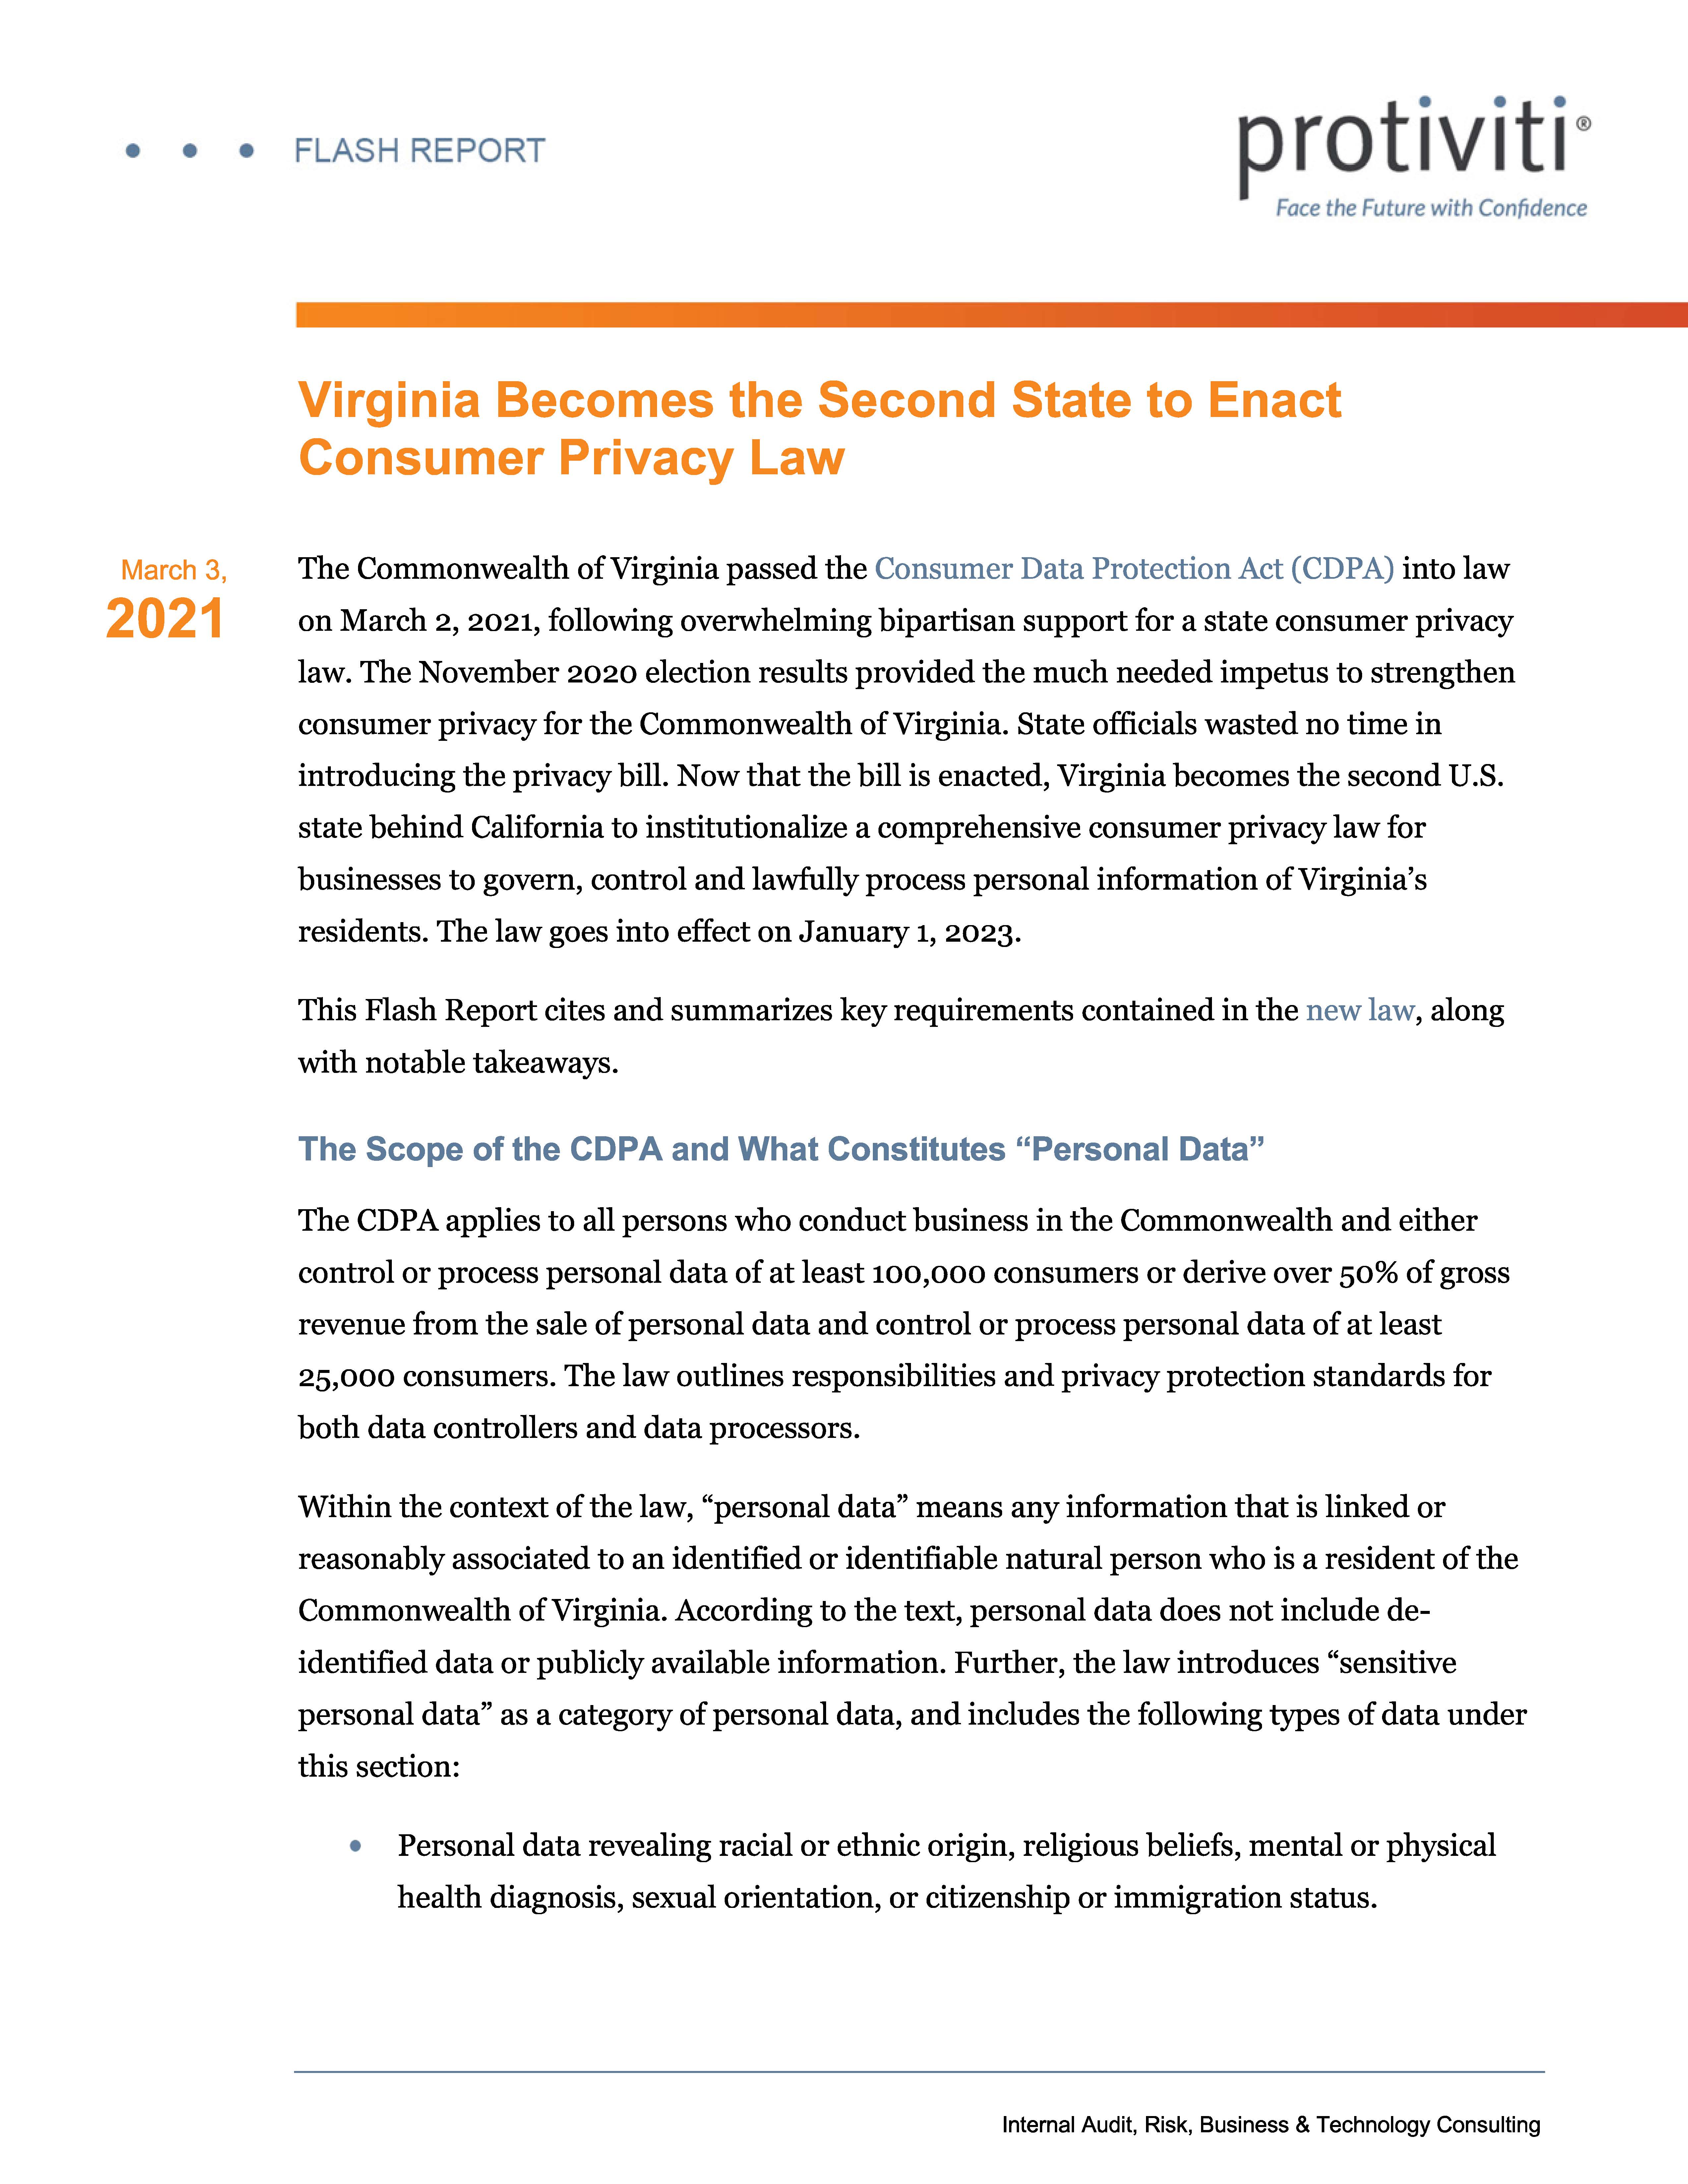 Screenshot of the first page of Virginia Becomes the Second State to Enact Consumer Privacy Law